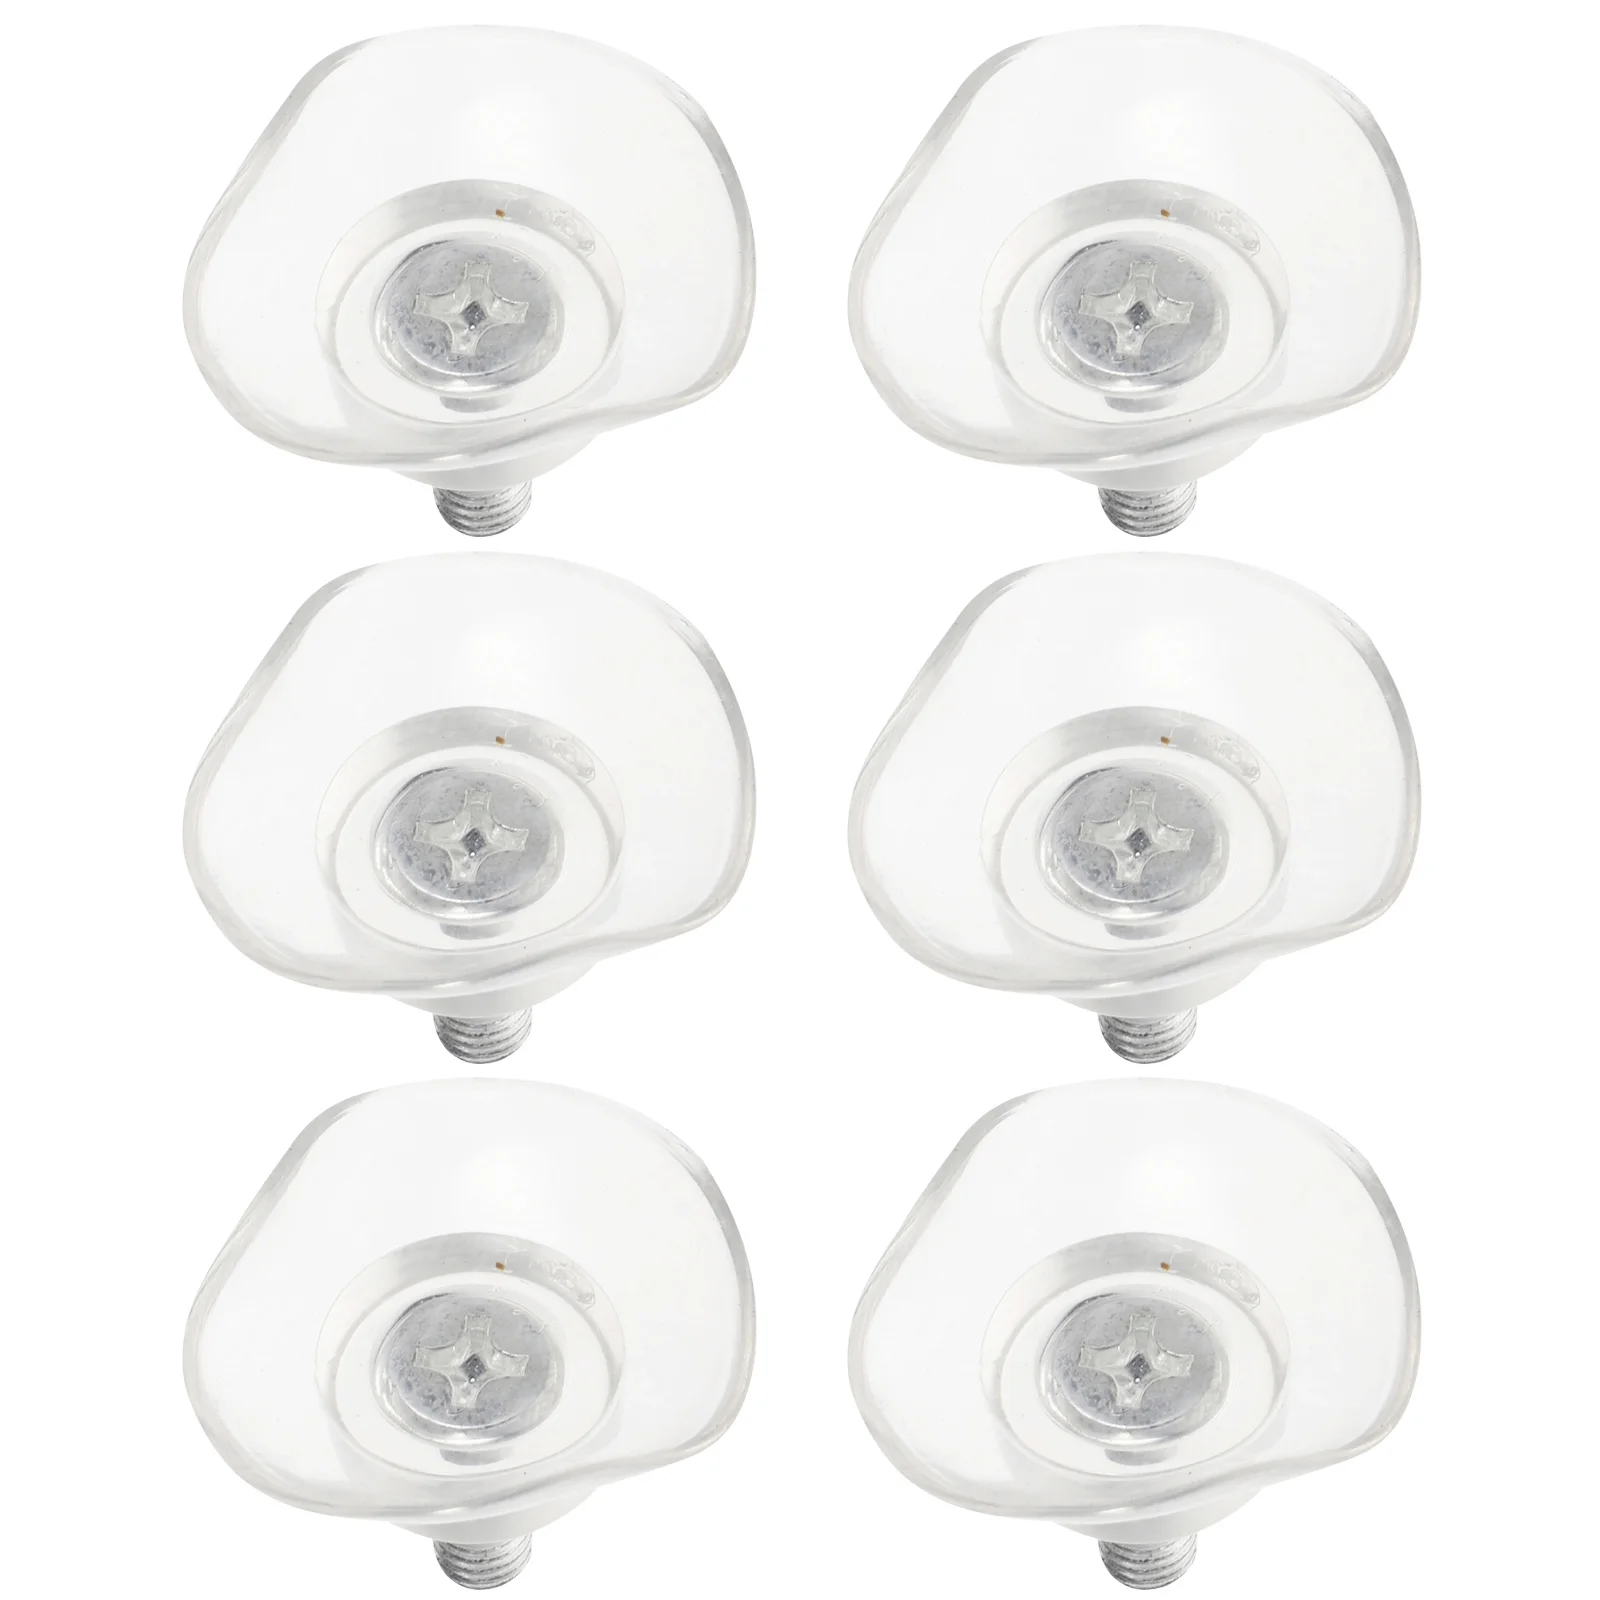 

Furniture Desk Glass PVC Transparent Anti-Collision Suction Cups Sucker Hanger Pads with Screws for Glass Table